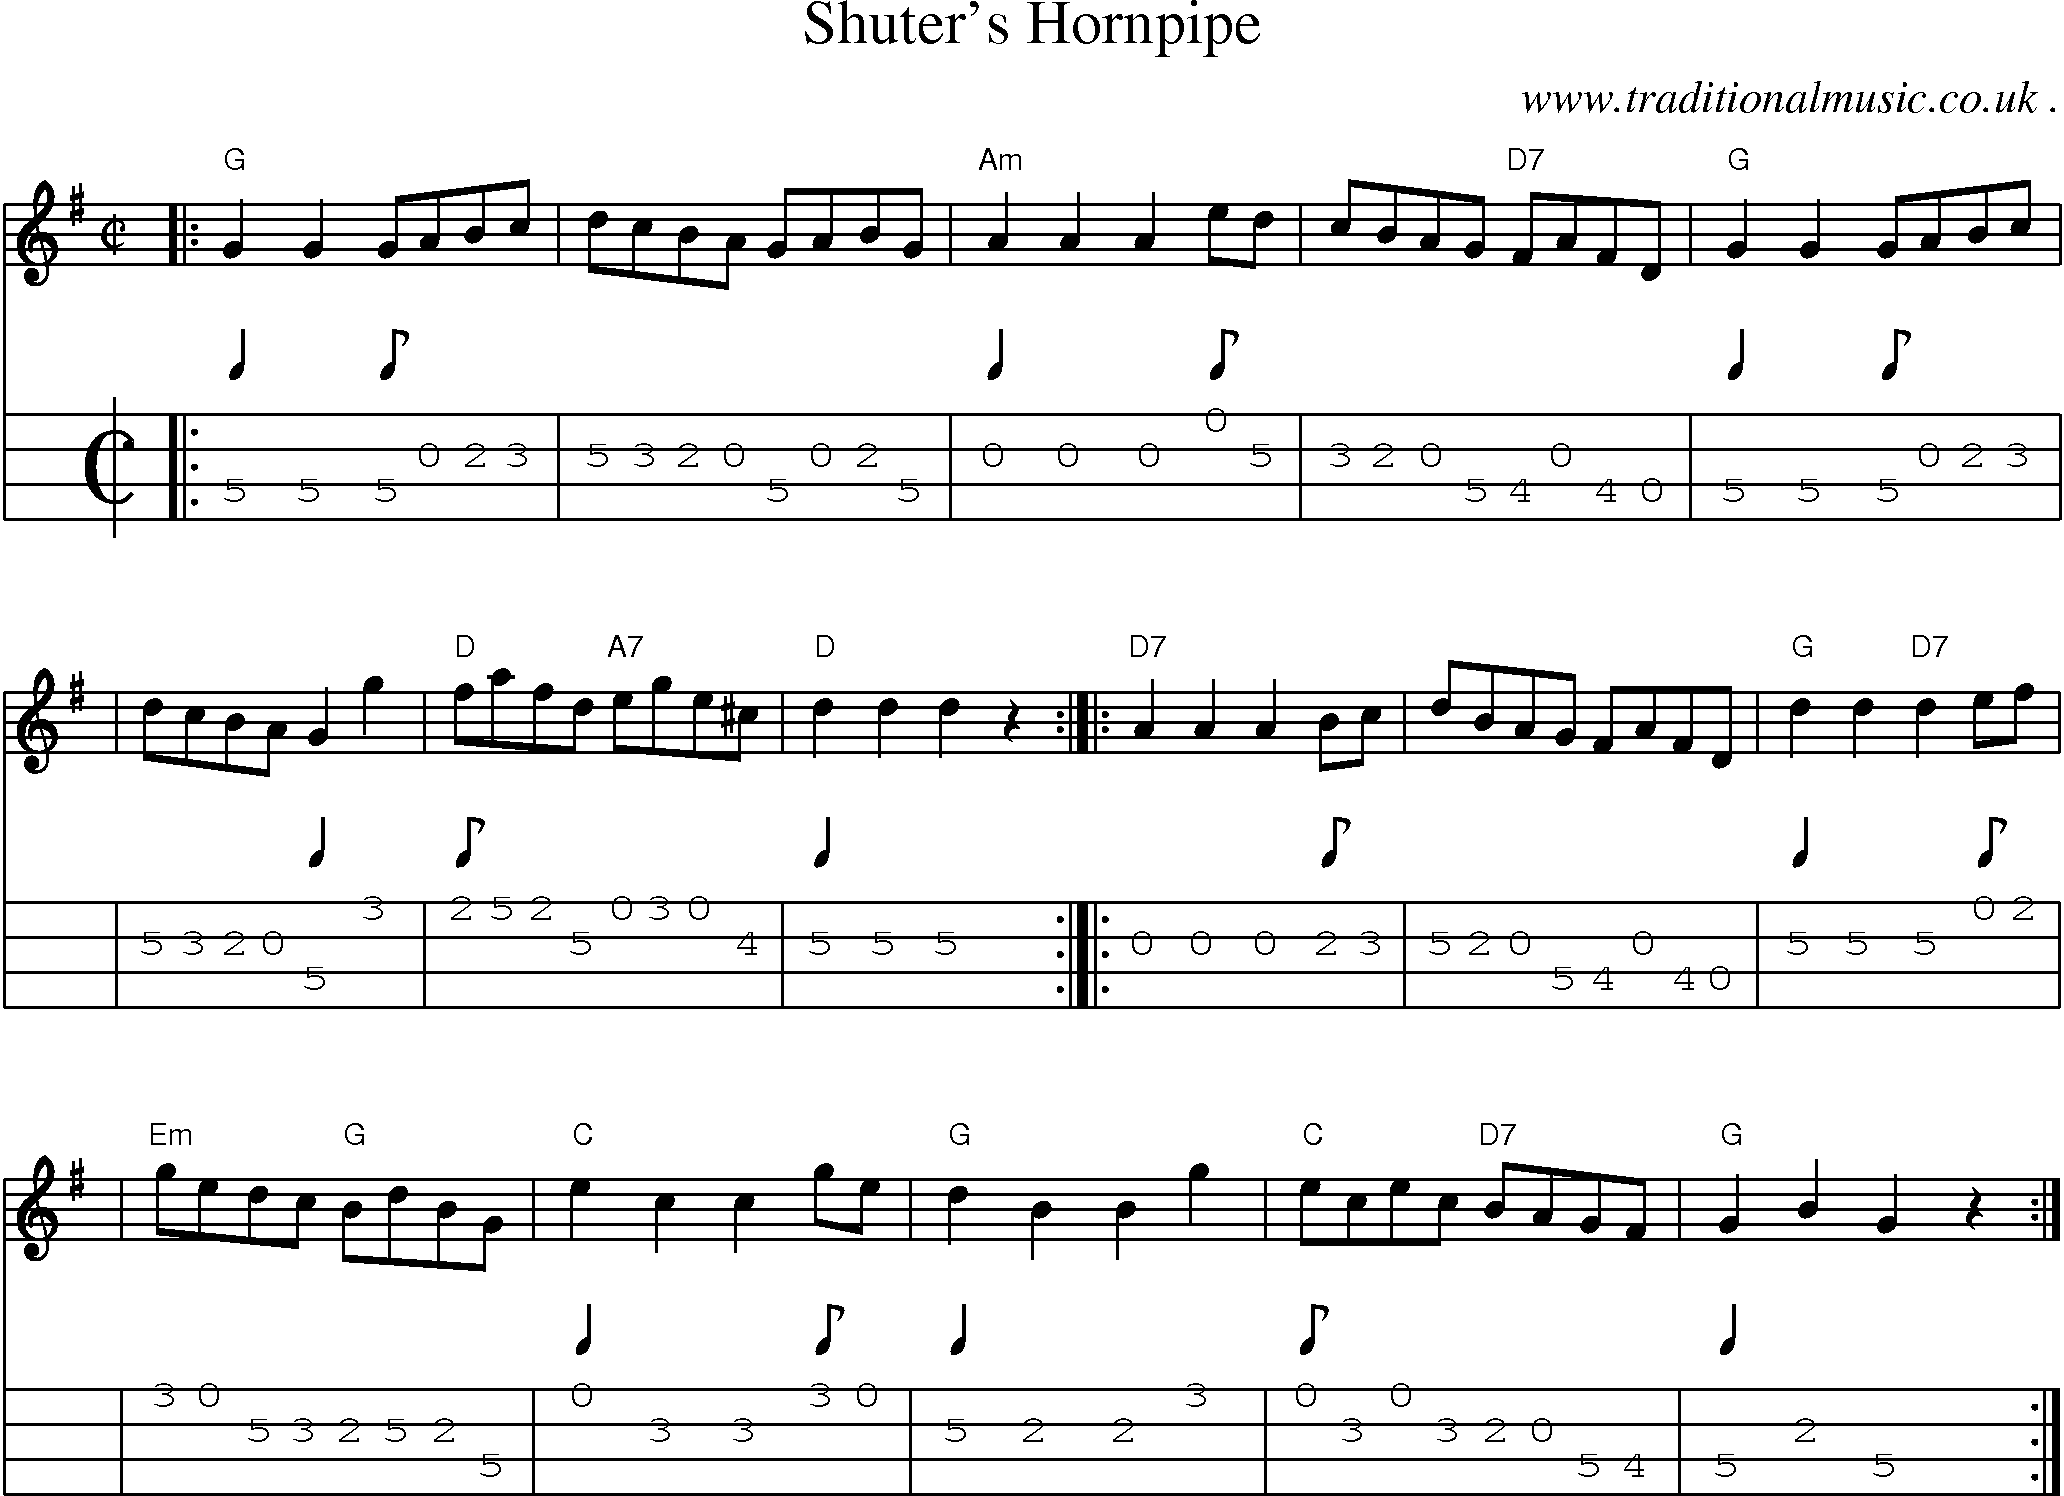 Sheet-music  score, Chords and Mandolin Tabs for Shuters Hornpipe